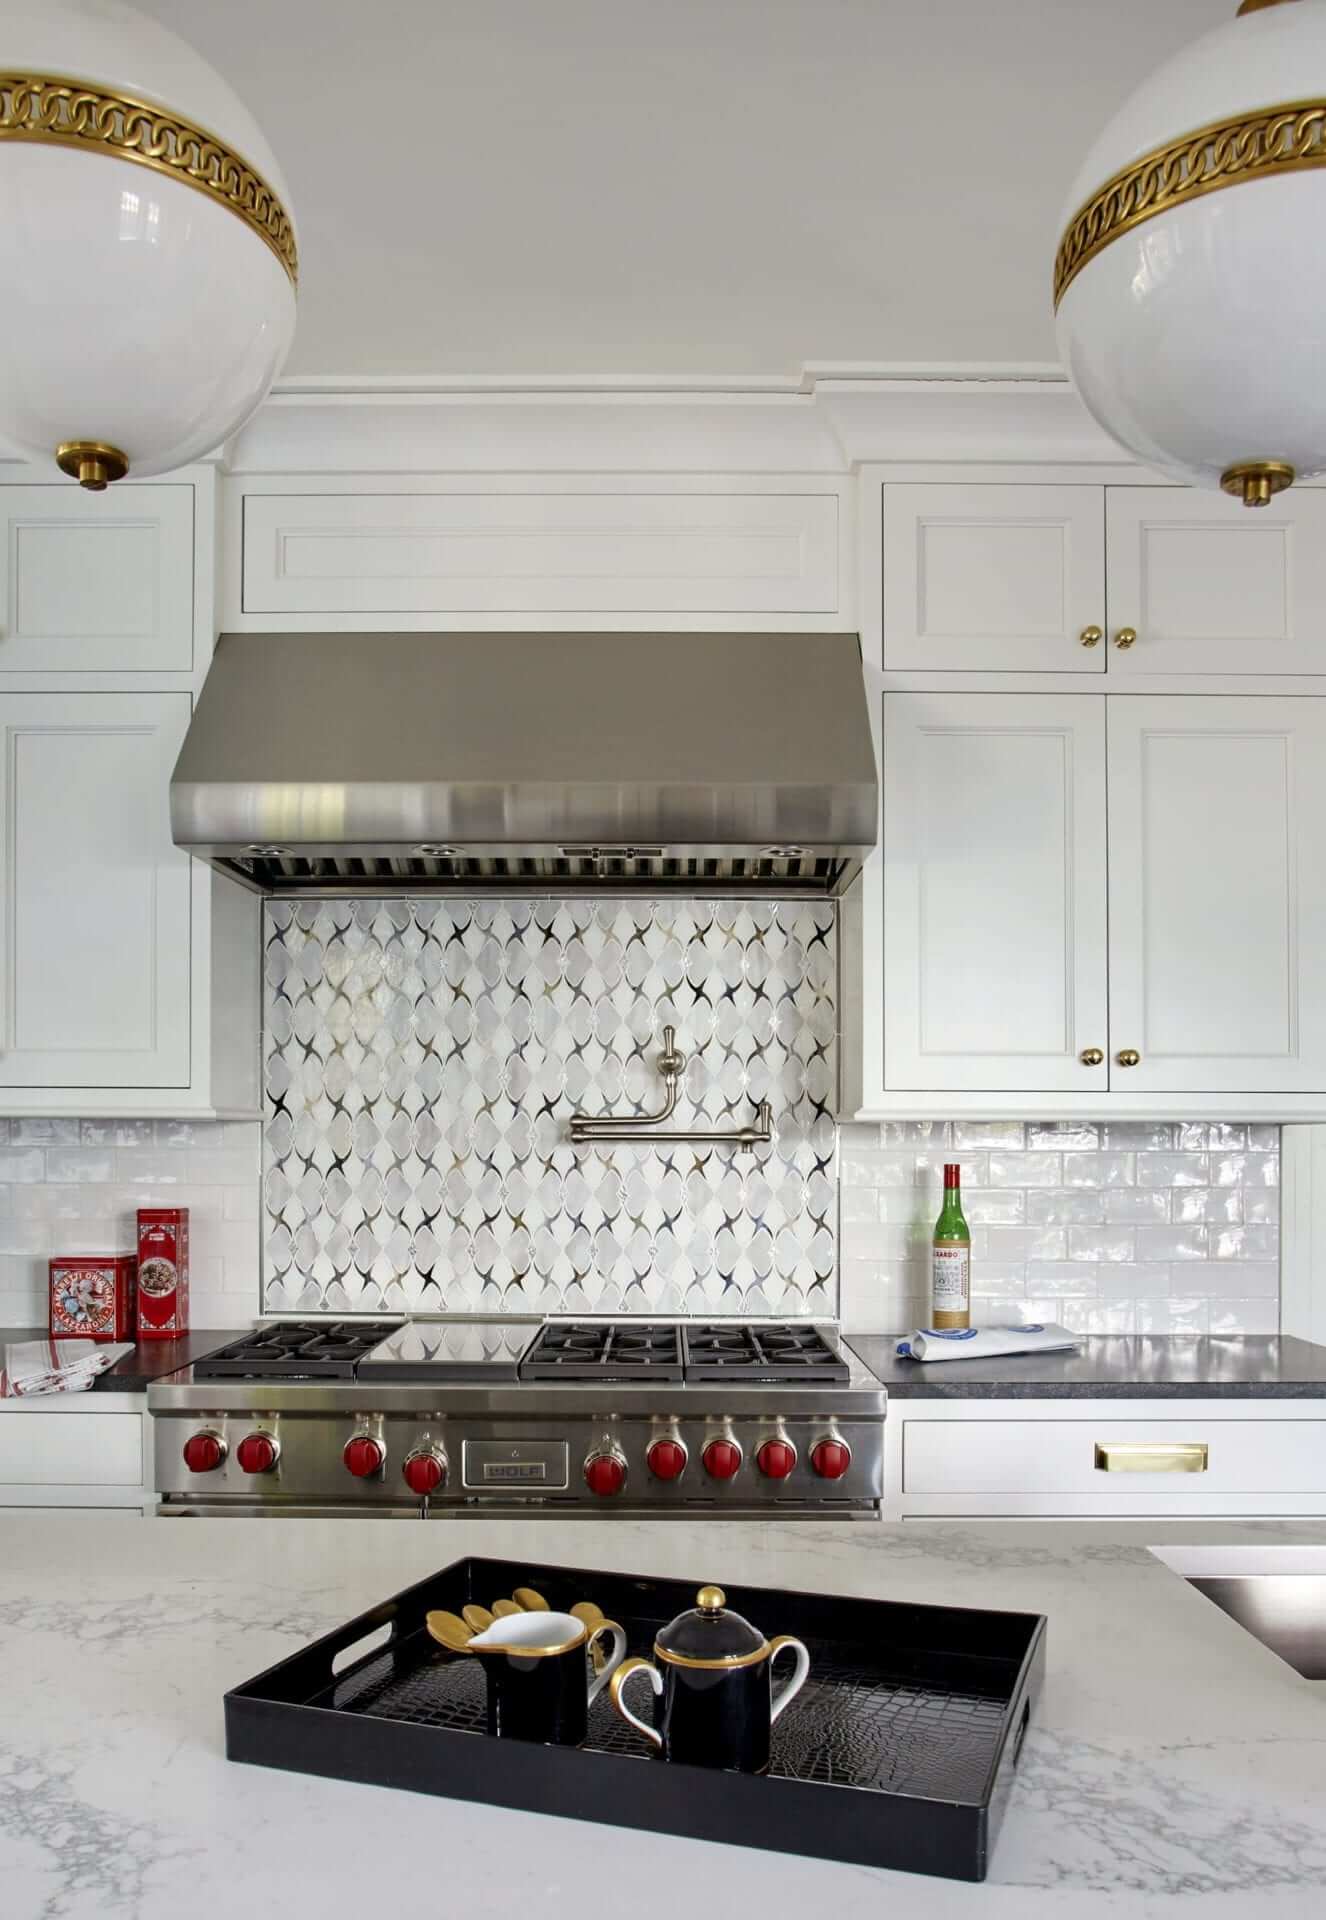 Art Deco inspired kitchen features white Bilotta cabinetry with brass hardware and brass accented lighting